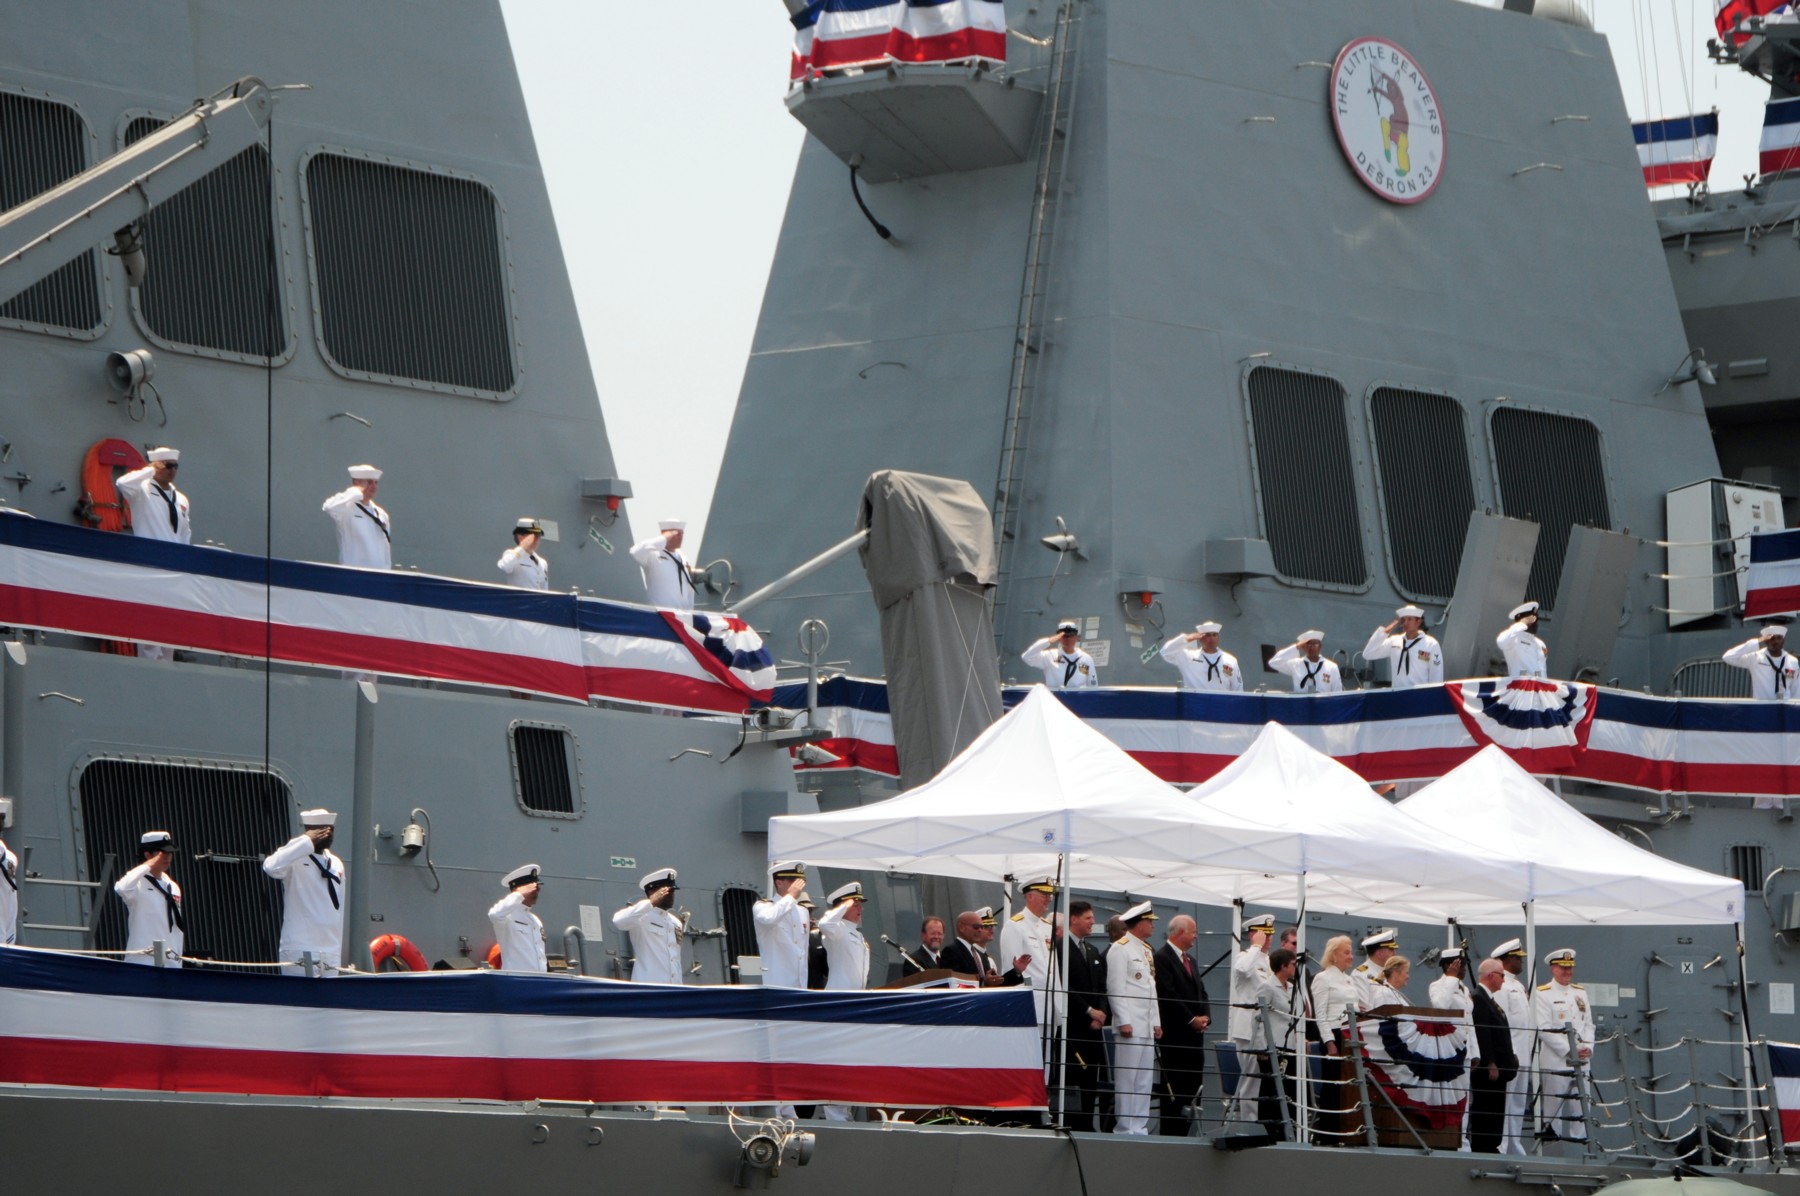 ddg-110 uss william p. lawrence arleigh burke class guided missile destroyer aegis us navy commissioning ceremony mobile alabama 42